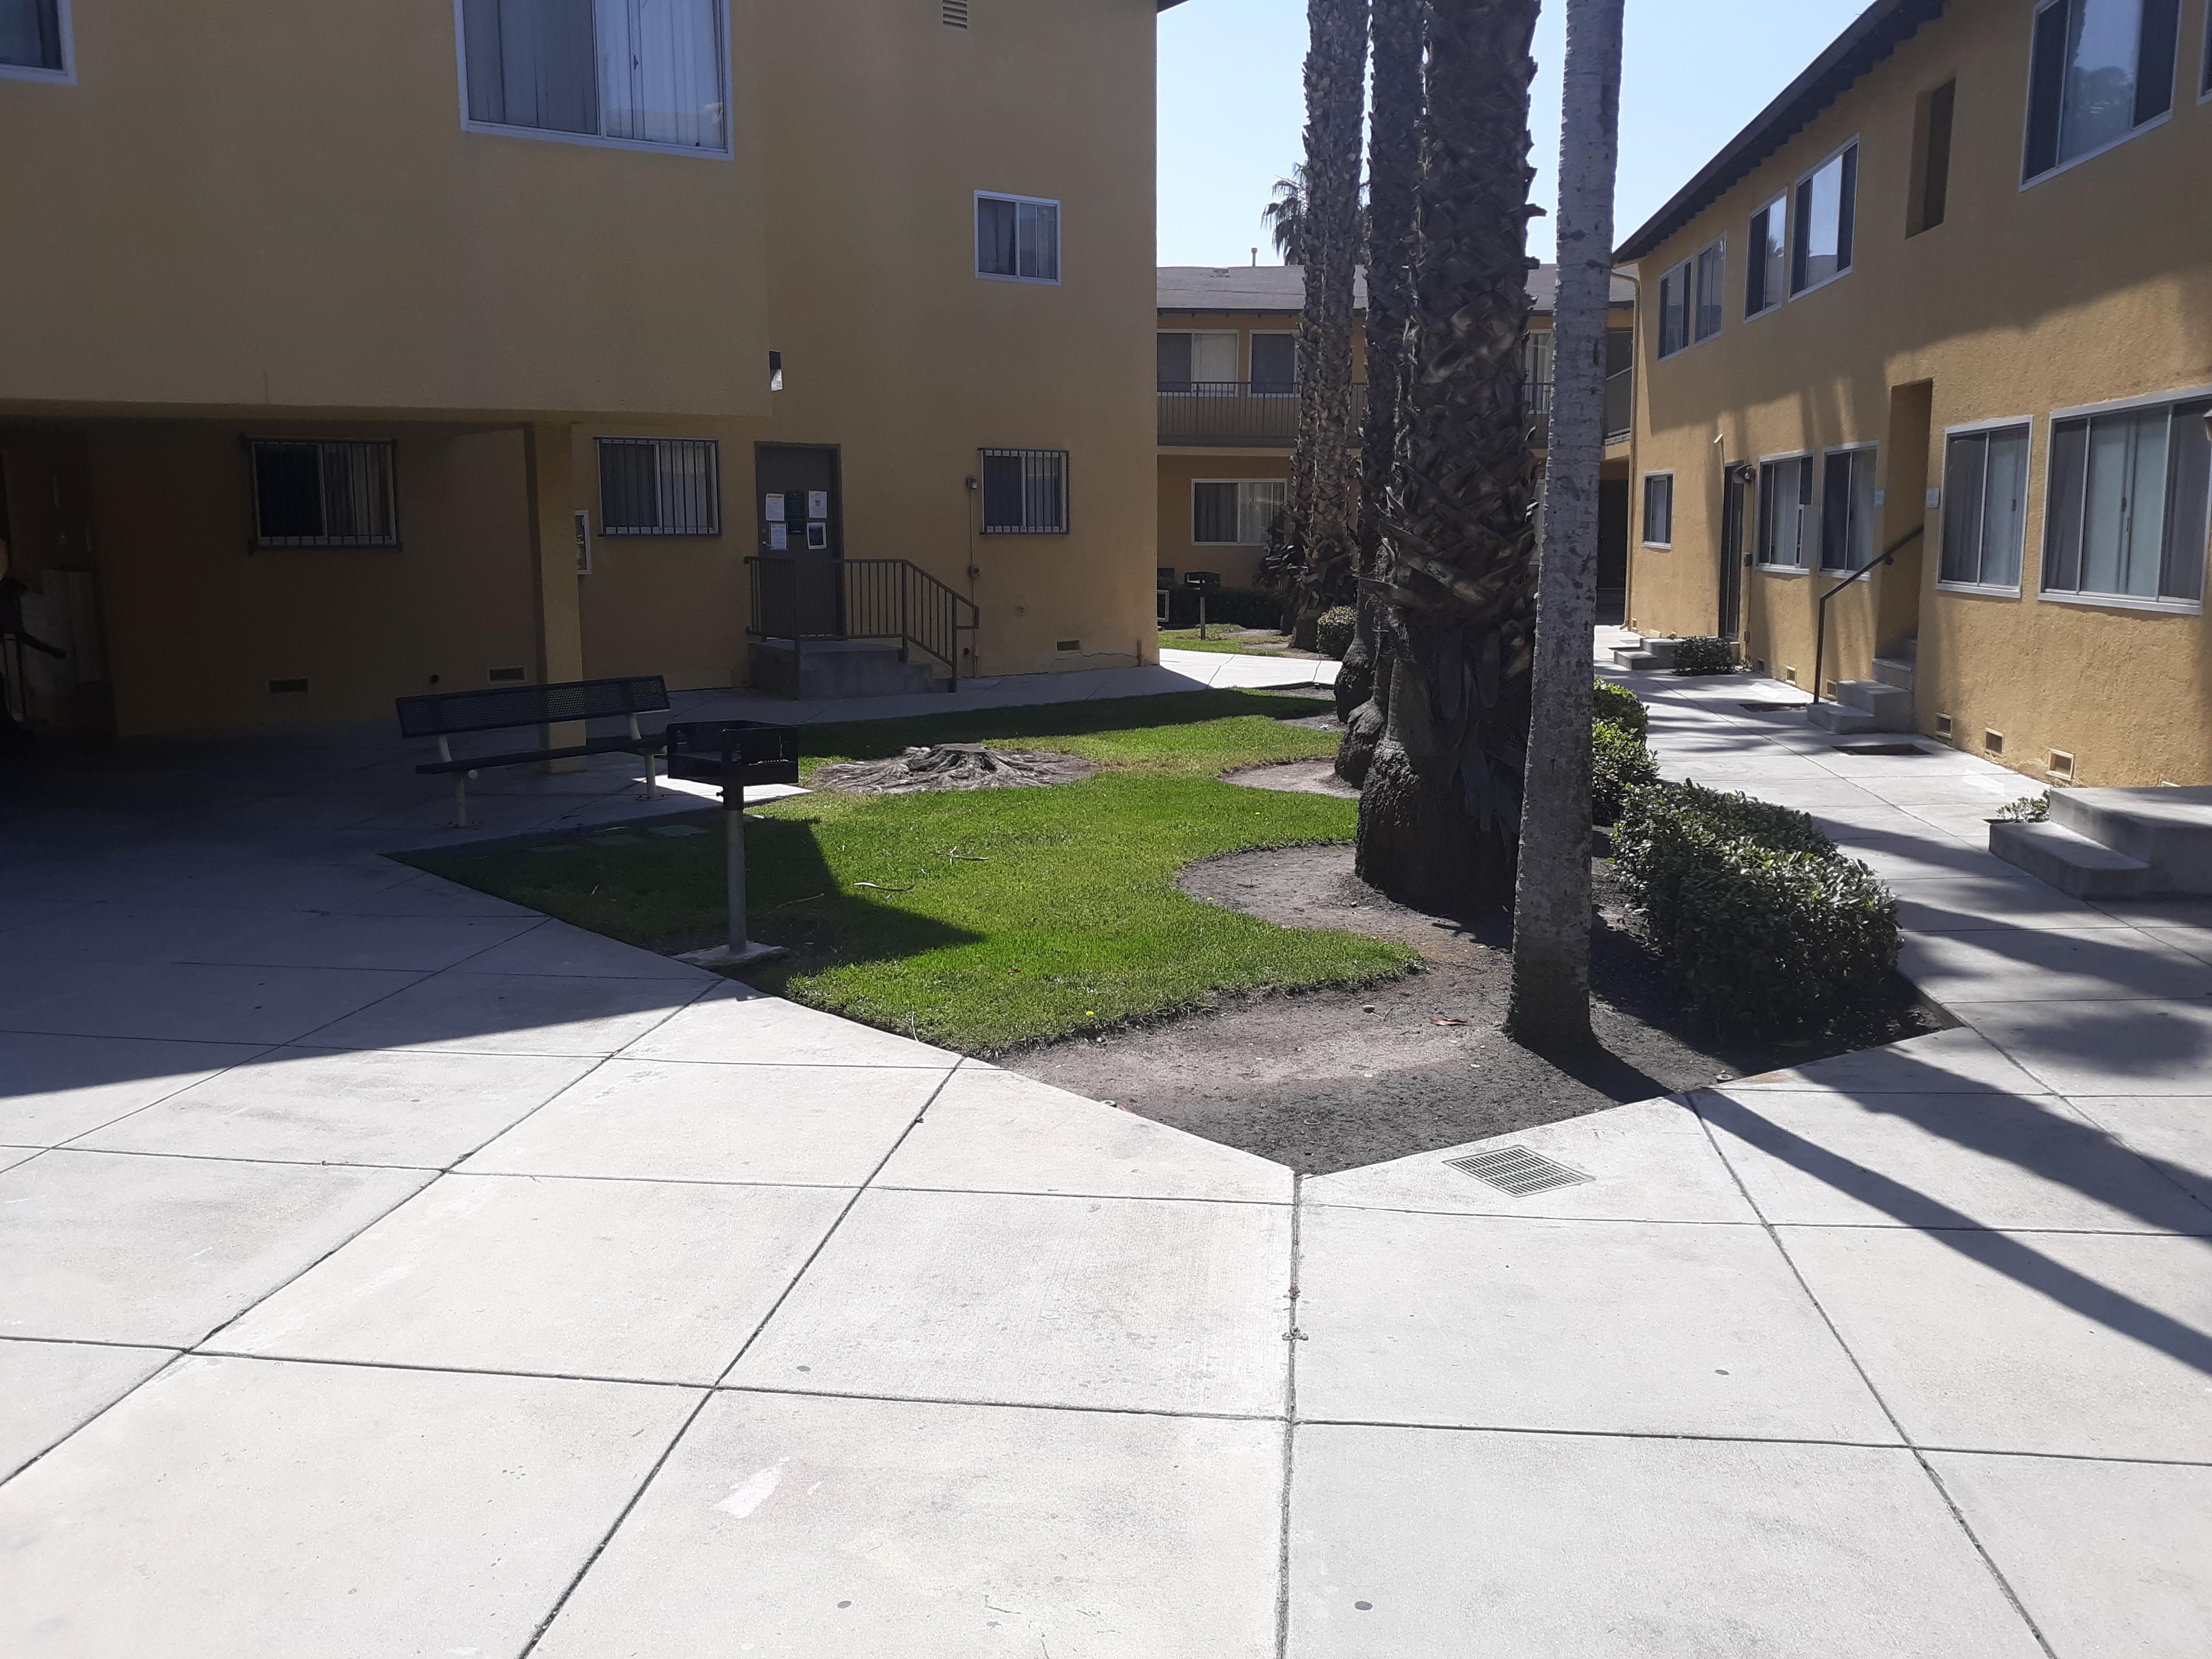 Exterior view of Park Lane Family Housing showing a courtyard with tall palm trees in the center